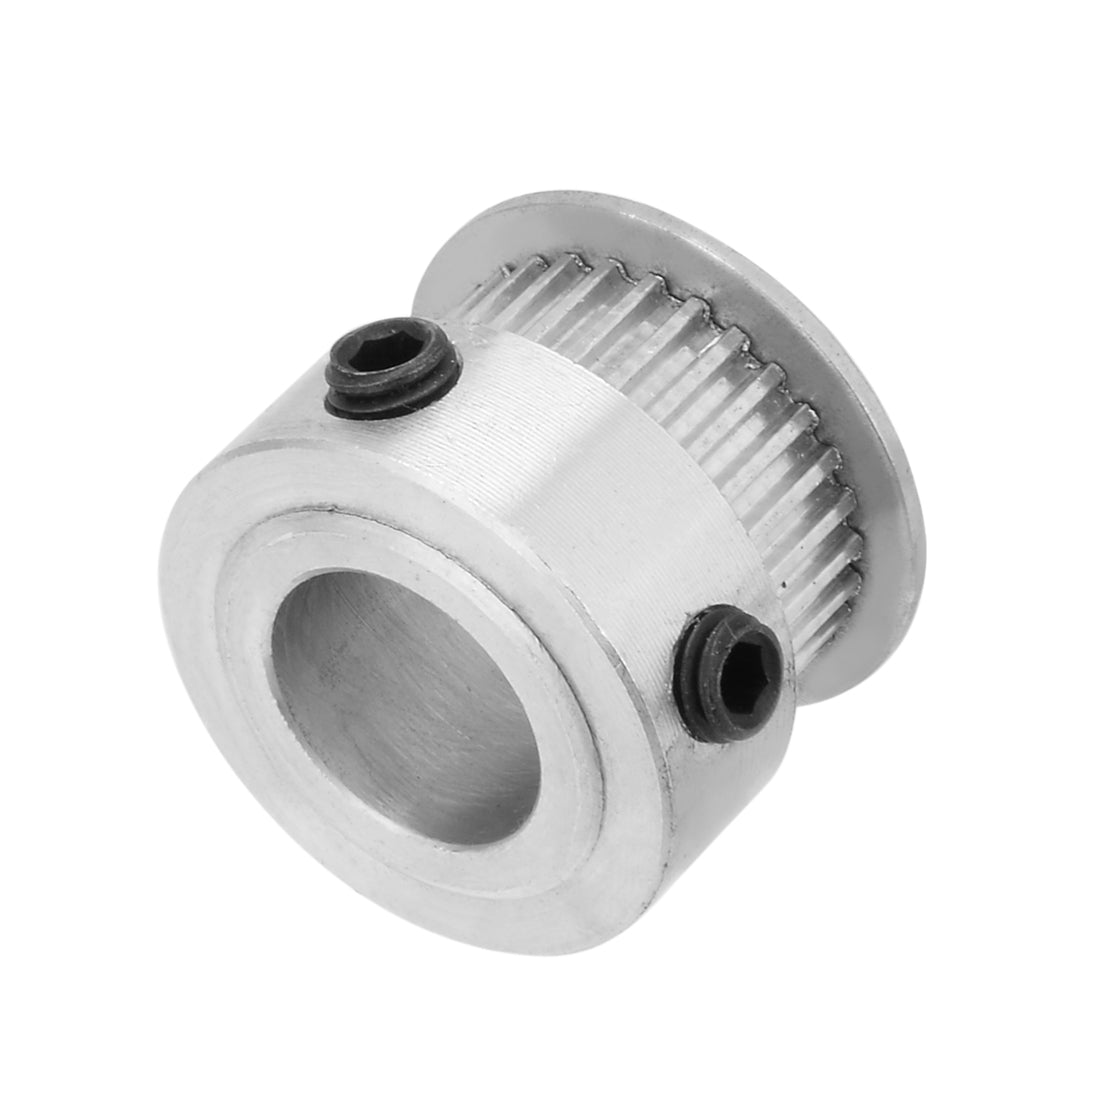 uxcell Uxcell Aluminum M-X-L 30 Teeth 12mm Bore Timing Belt Idler Pulley Synchronous Wheel for 6mm Belt 3D Printer CNC